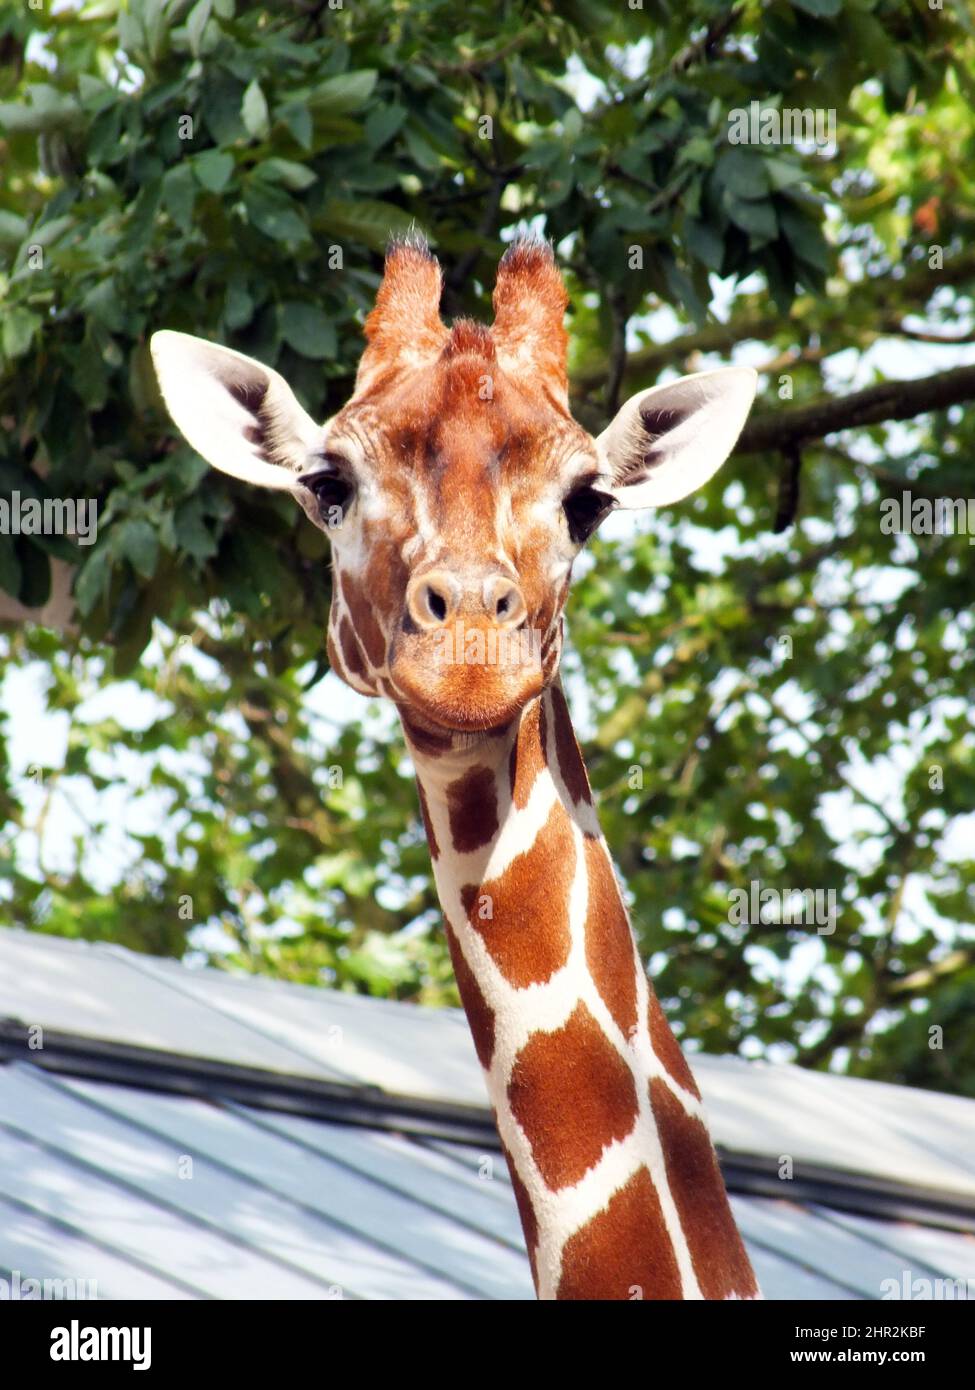 Giraffe close up photo in a zoo with green leaves background, cute happy giraffe face shot portrait image Stock Photo